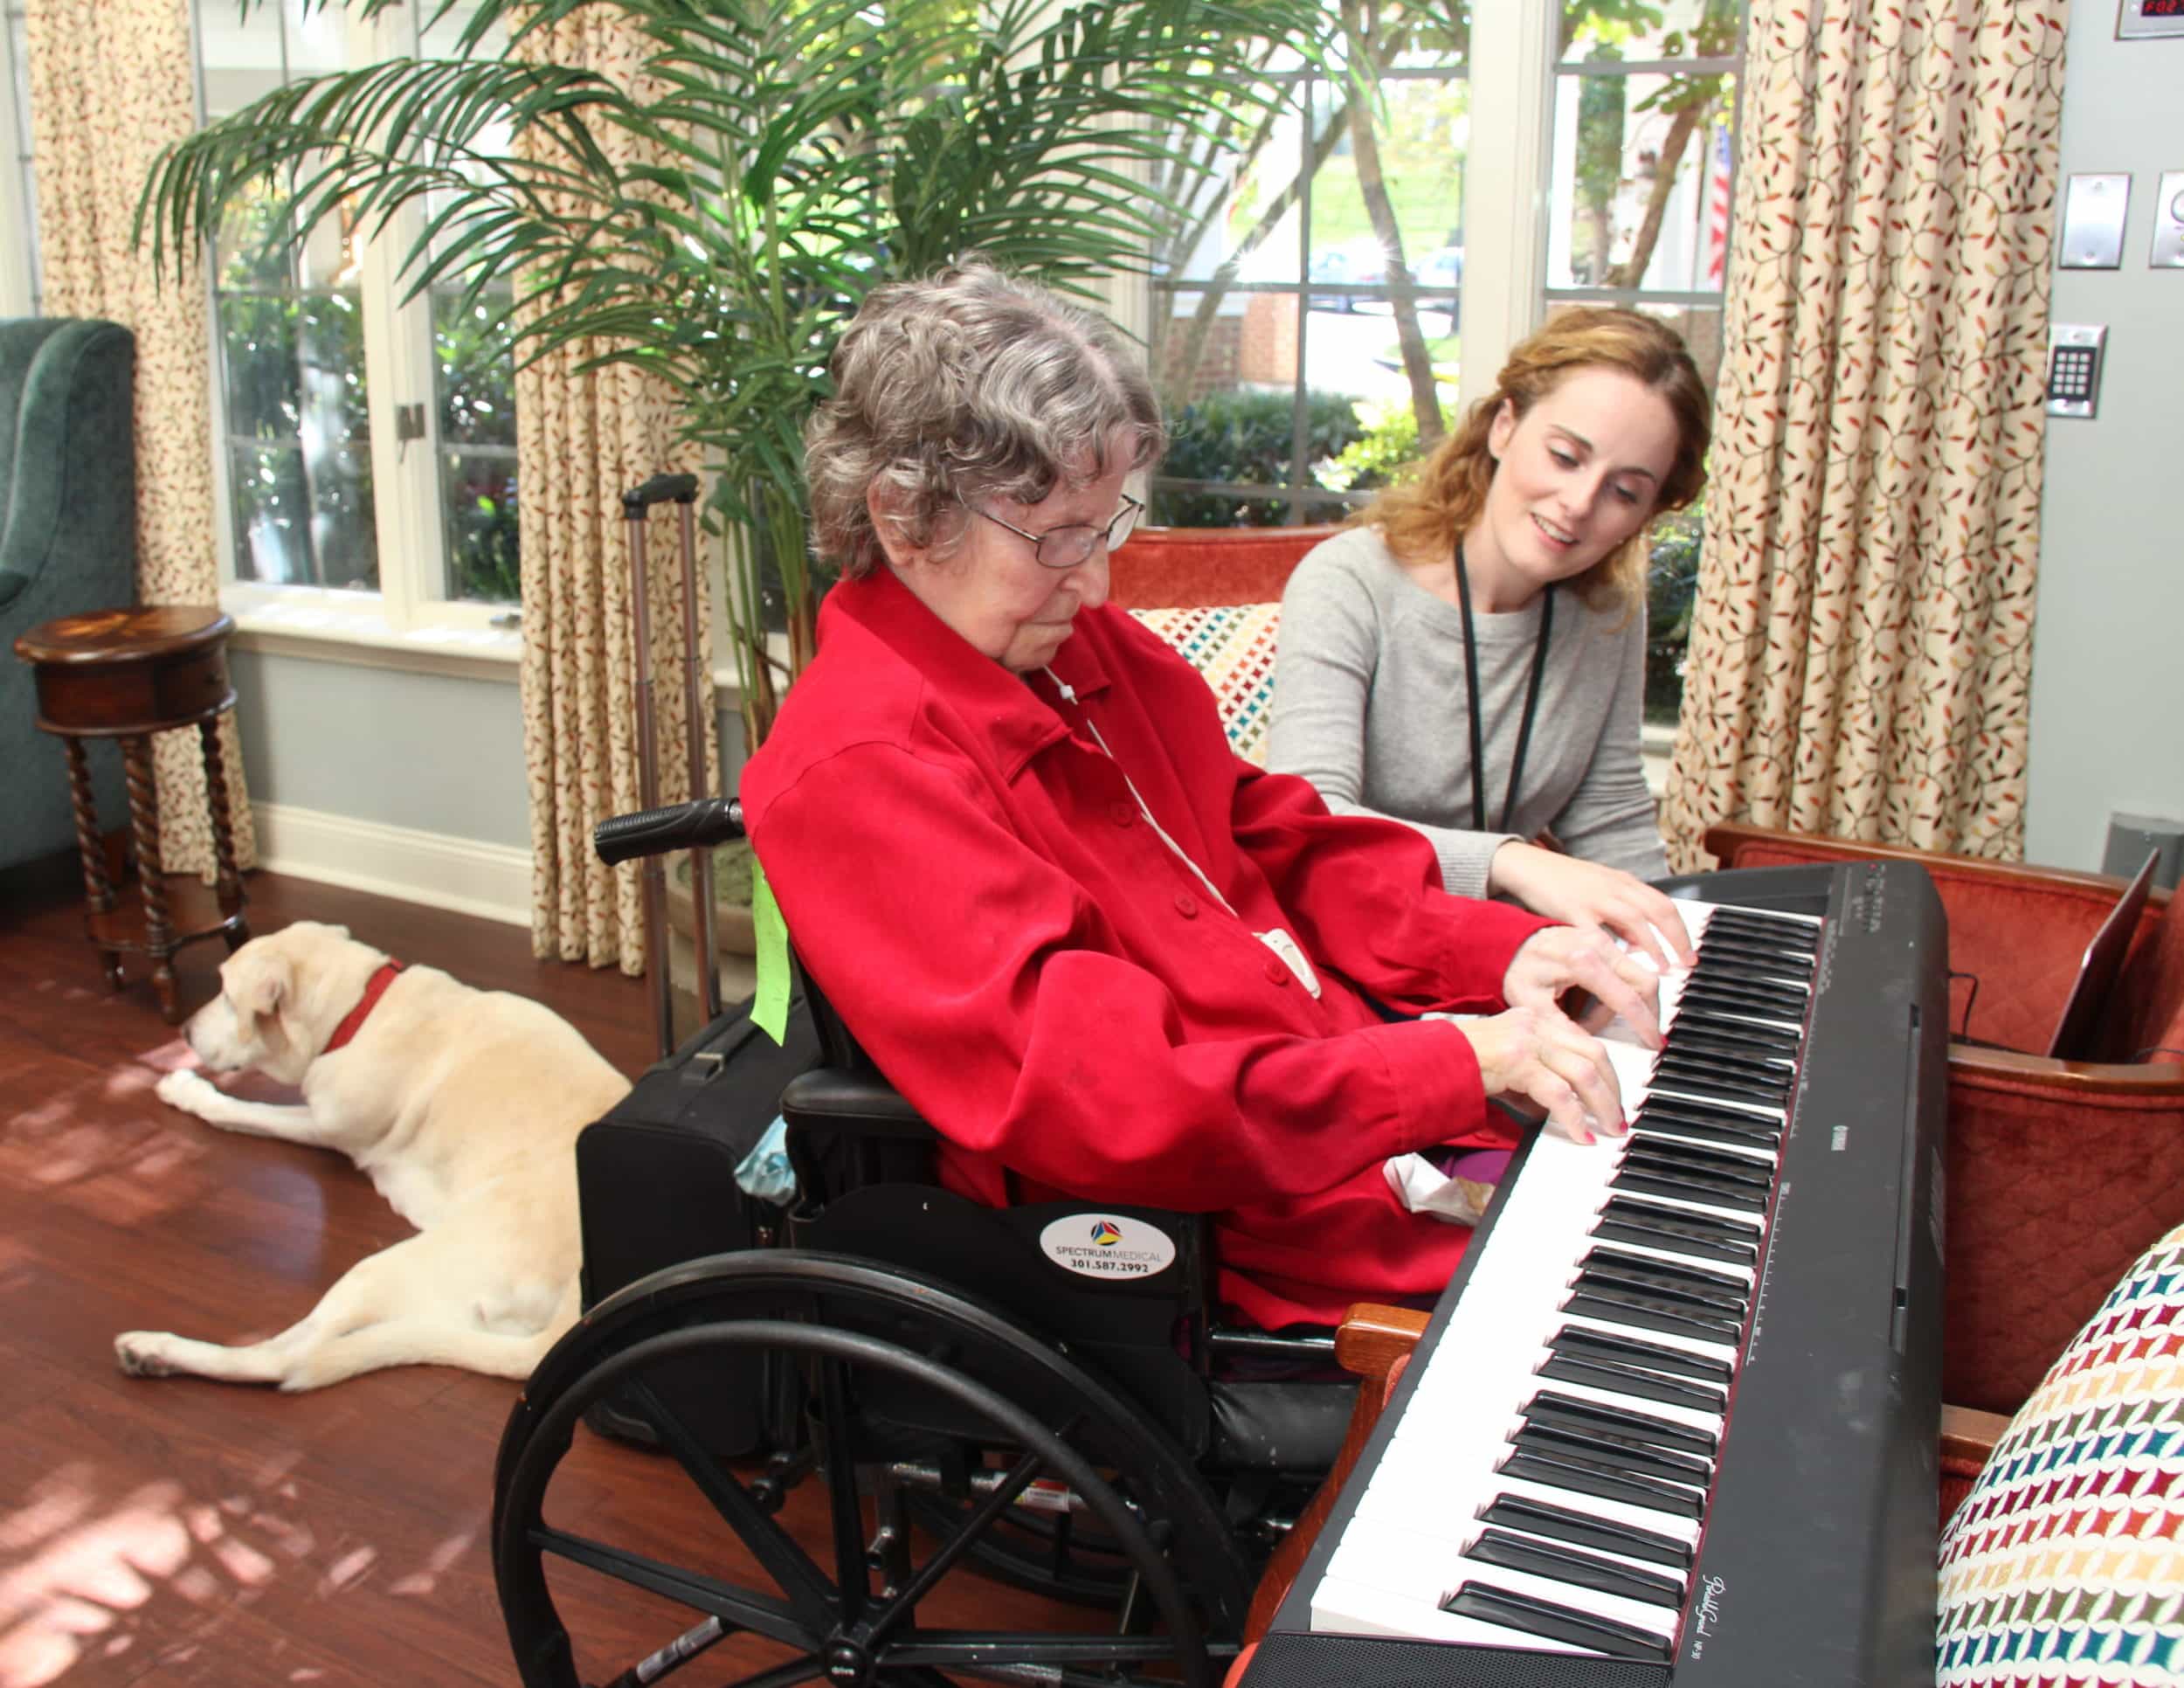 Kensington Park assisted living resident plays piano with full time music therapist, Jessica